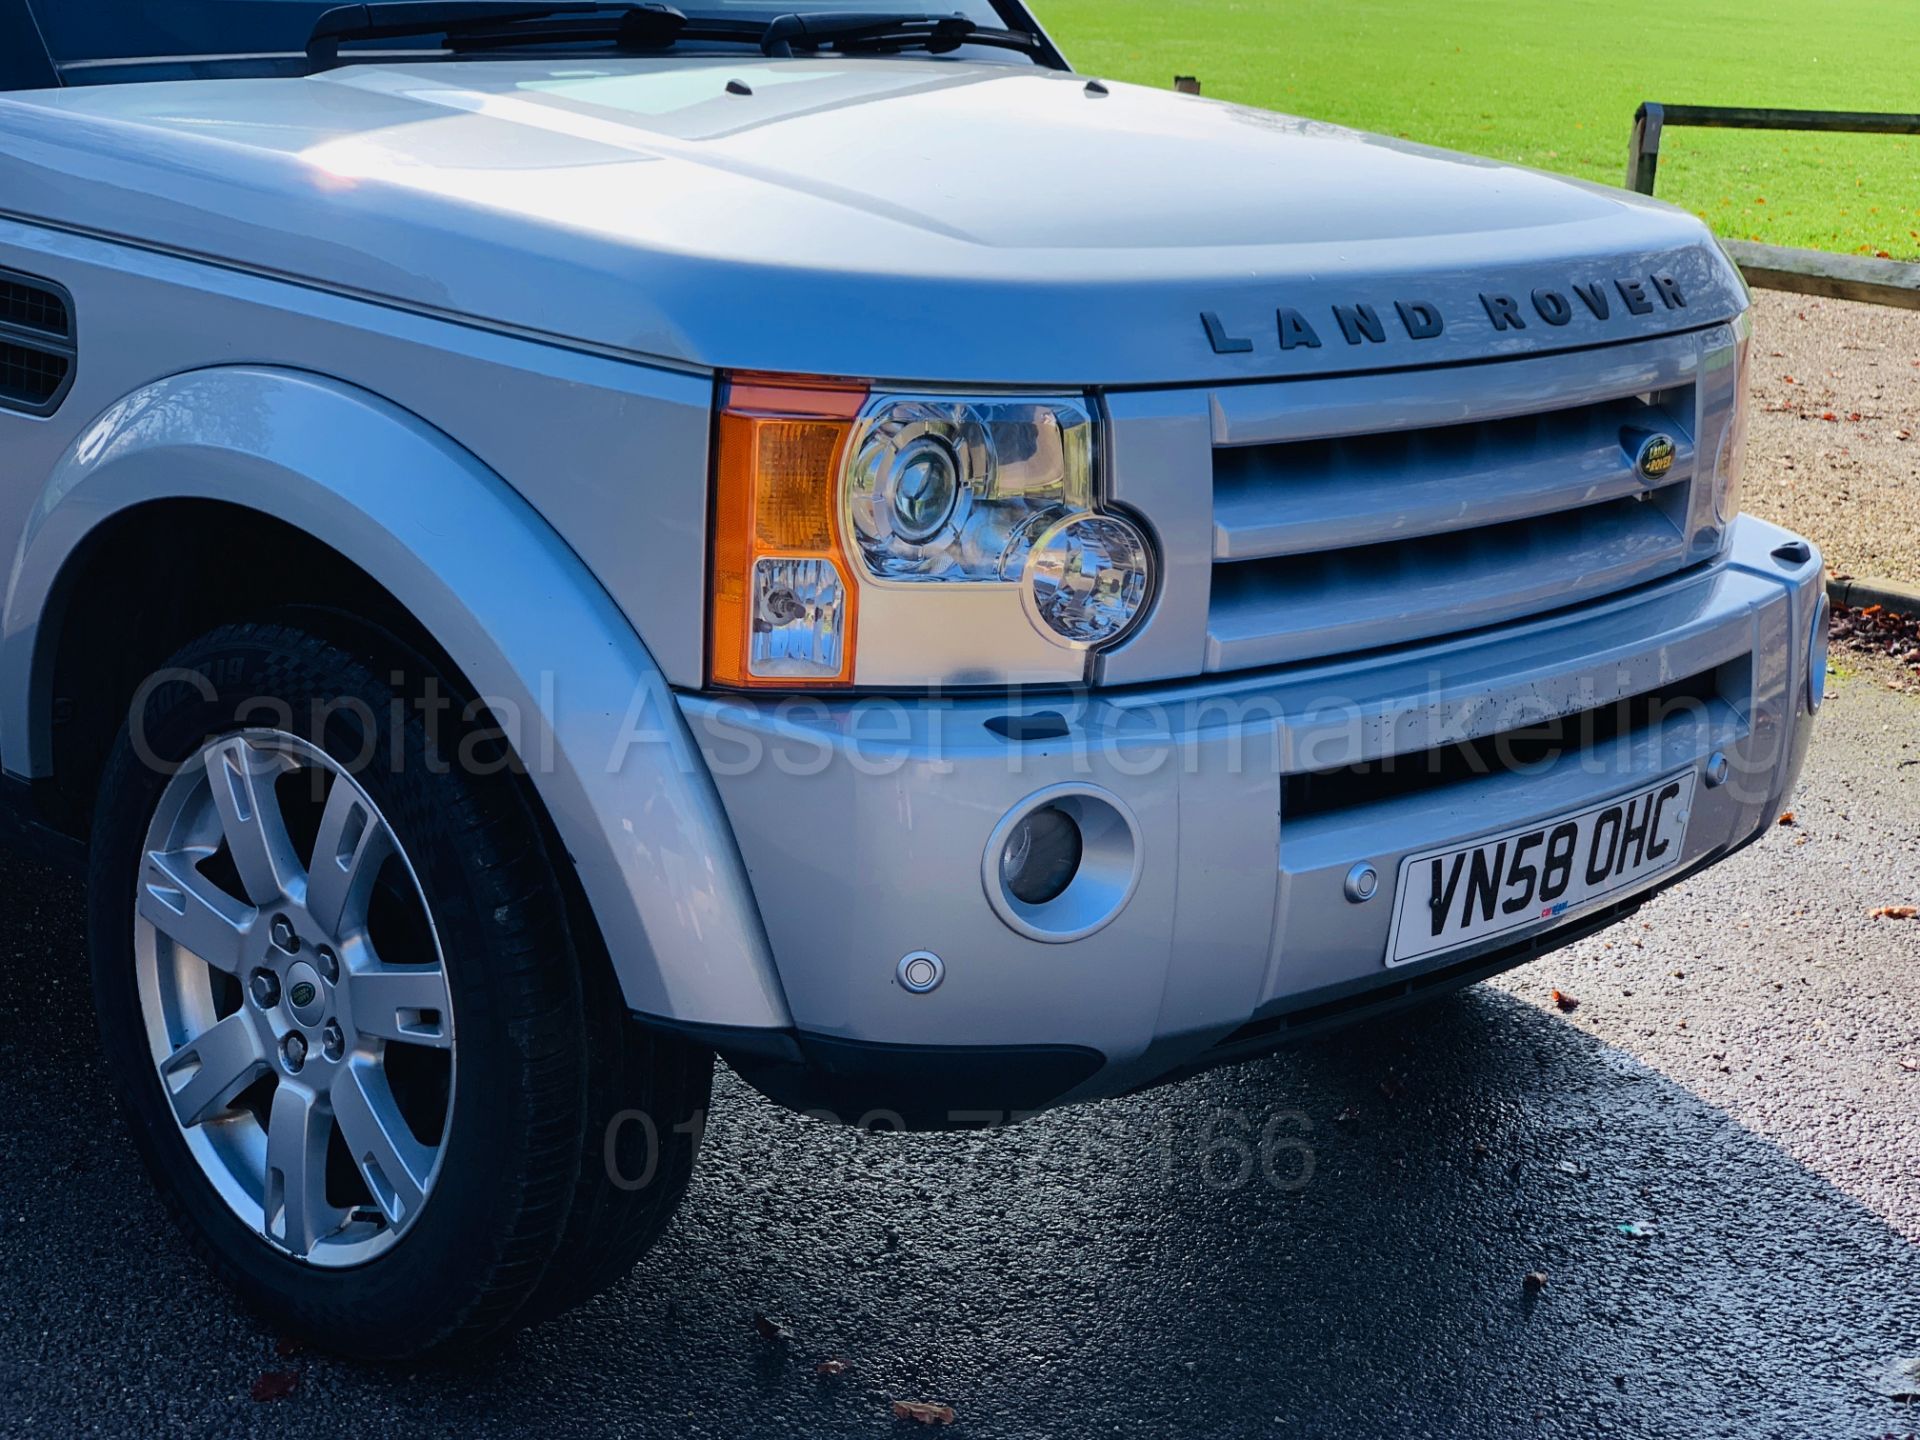 (On Sale) LAND ROVER DISCOVERY *HSE EDITION* (2009 MODEL) 'TDV6 - 190 BHP - AUTO' **LOOK** (NO VAT) - Image 13 of 53